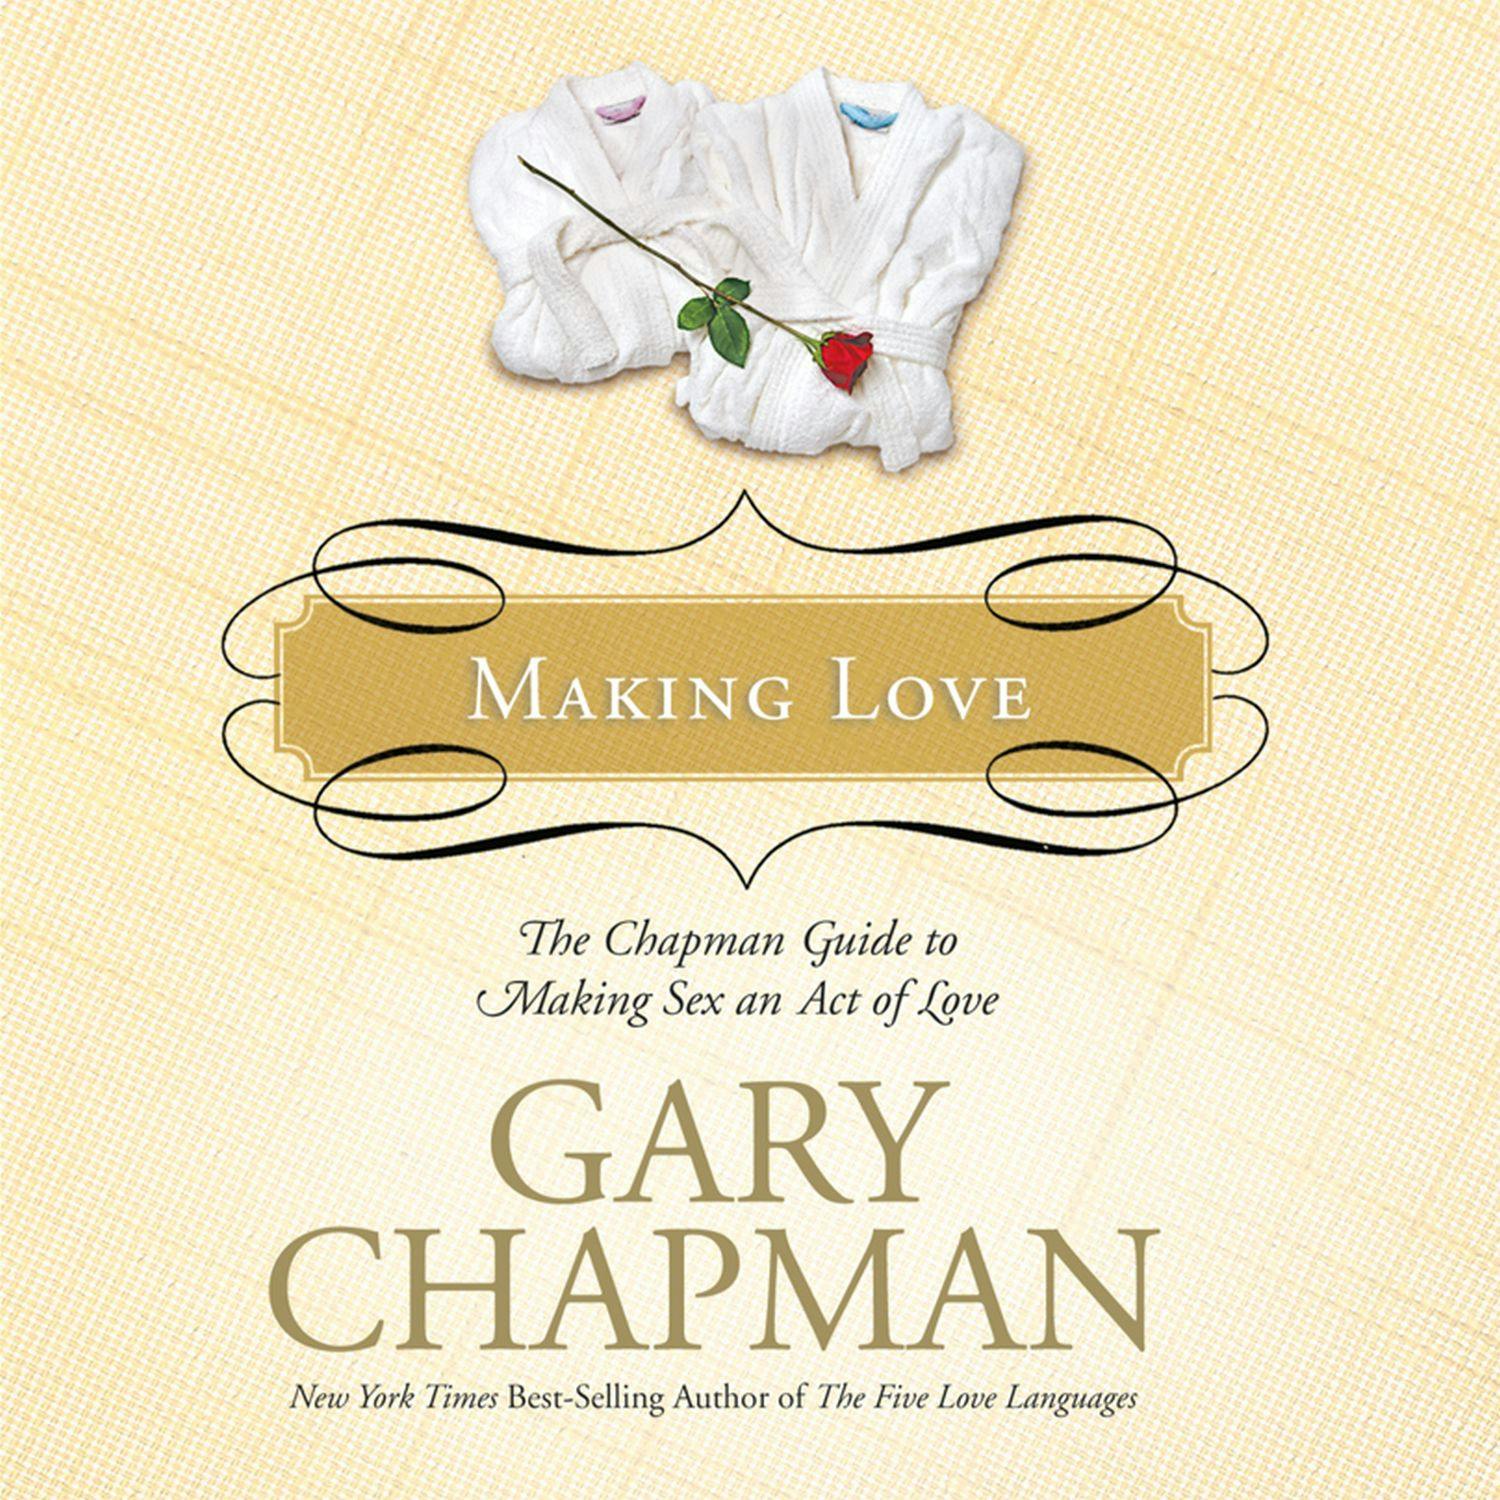 Making Love: The Chapman Guide to Making Sex an Act of Love - Gary Chapman